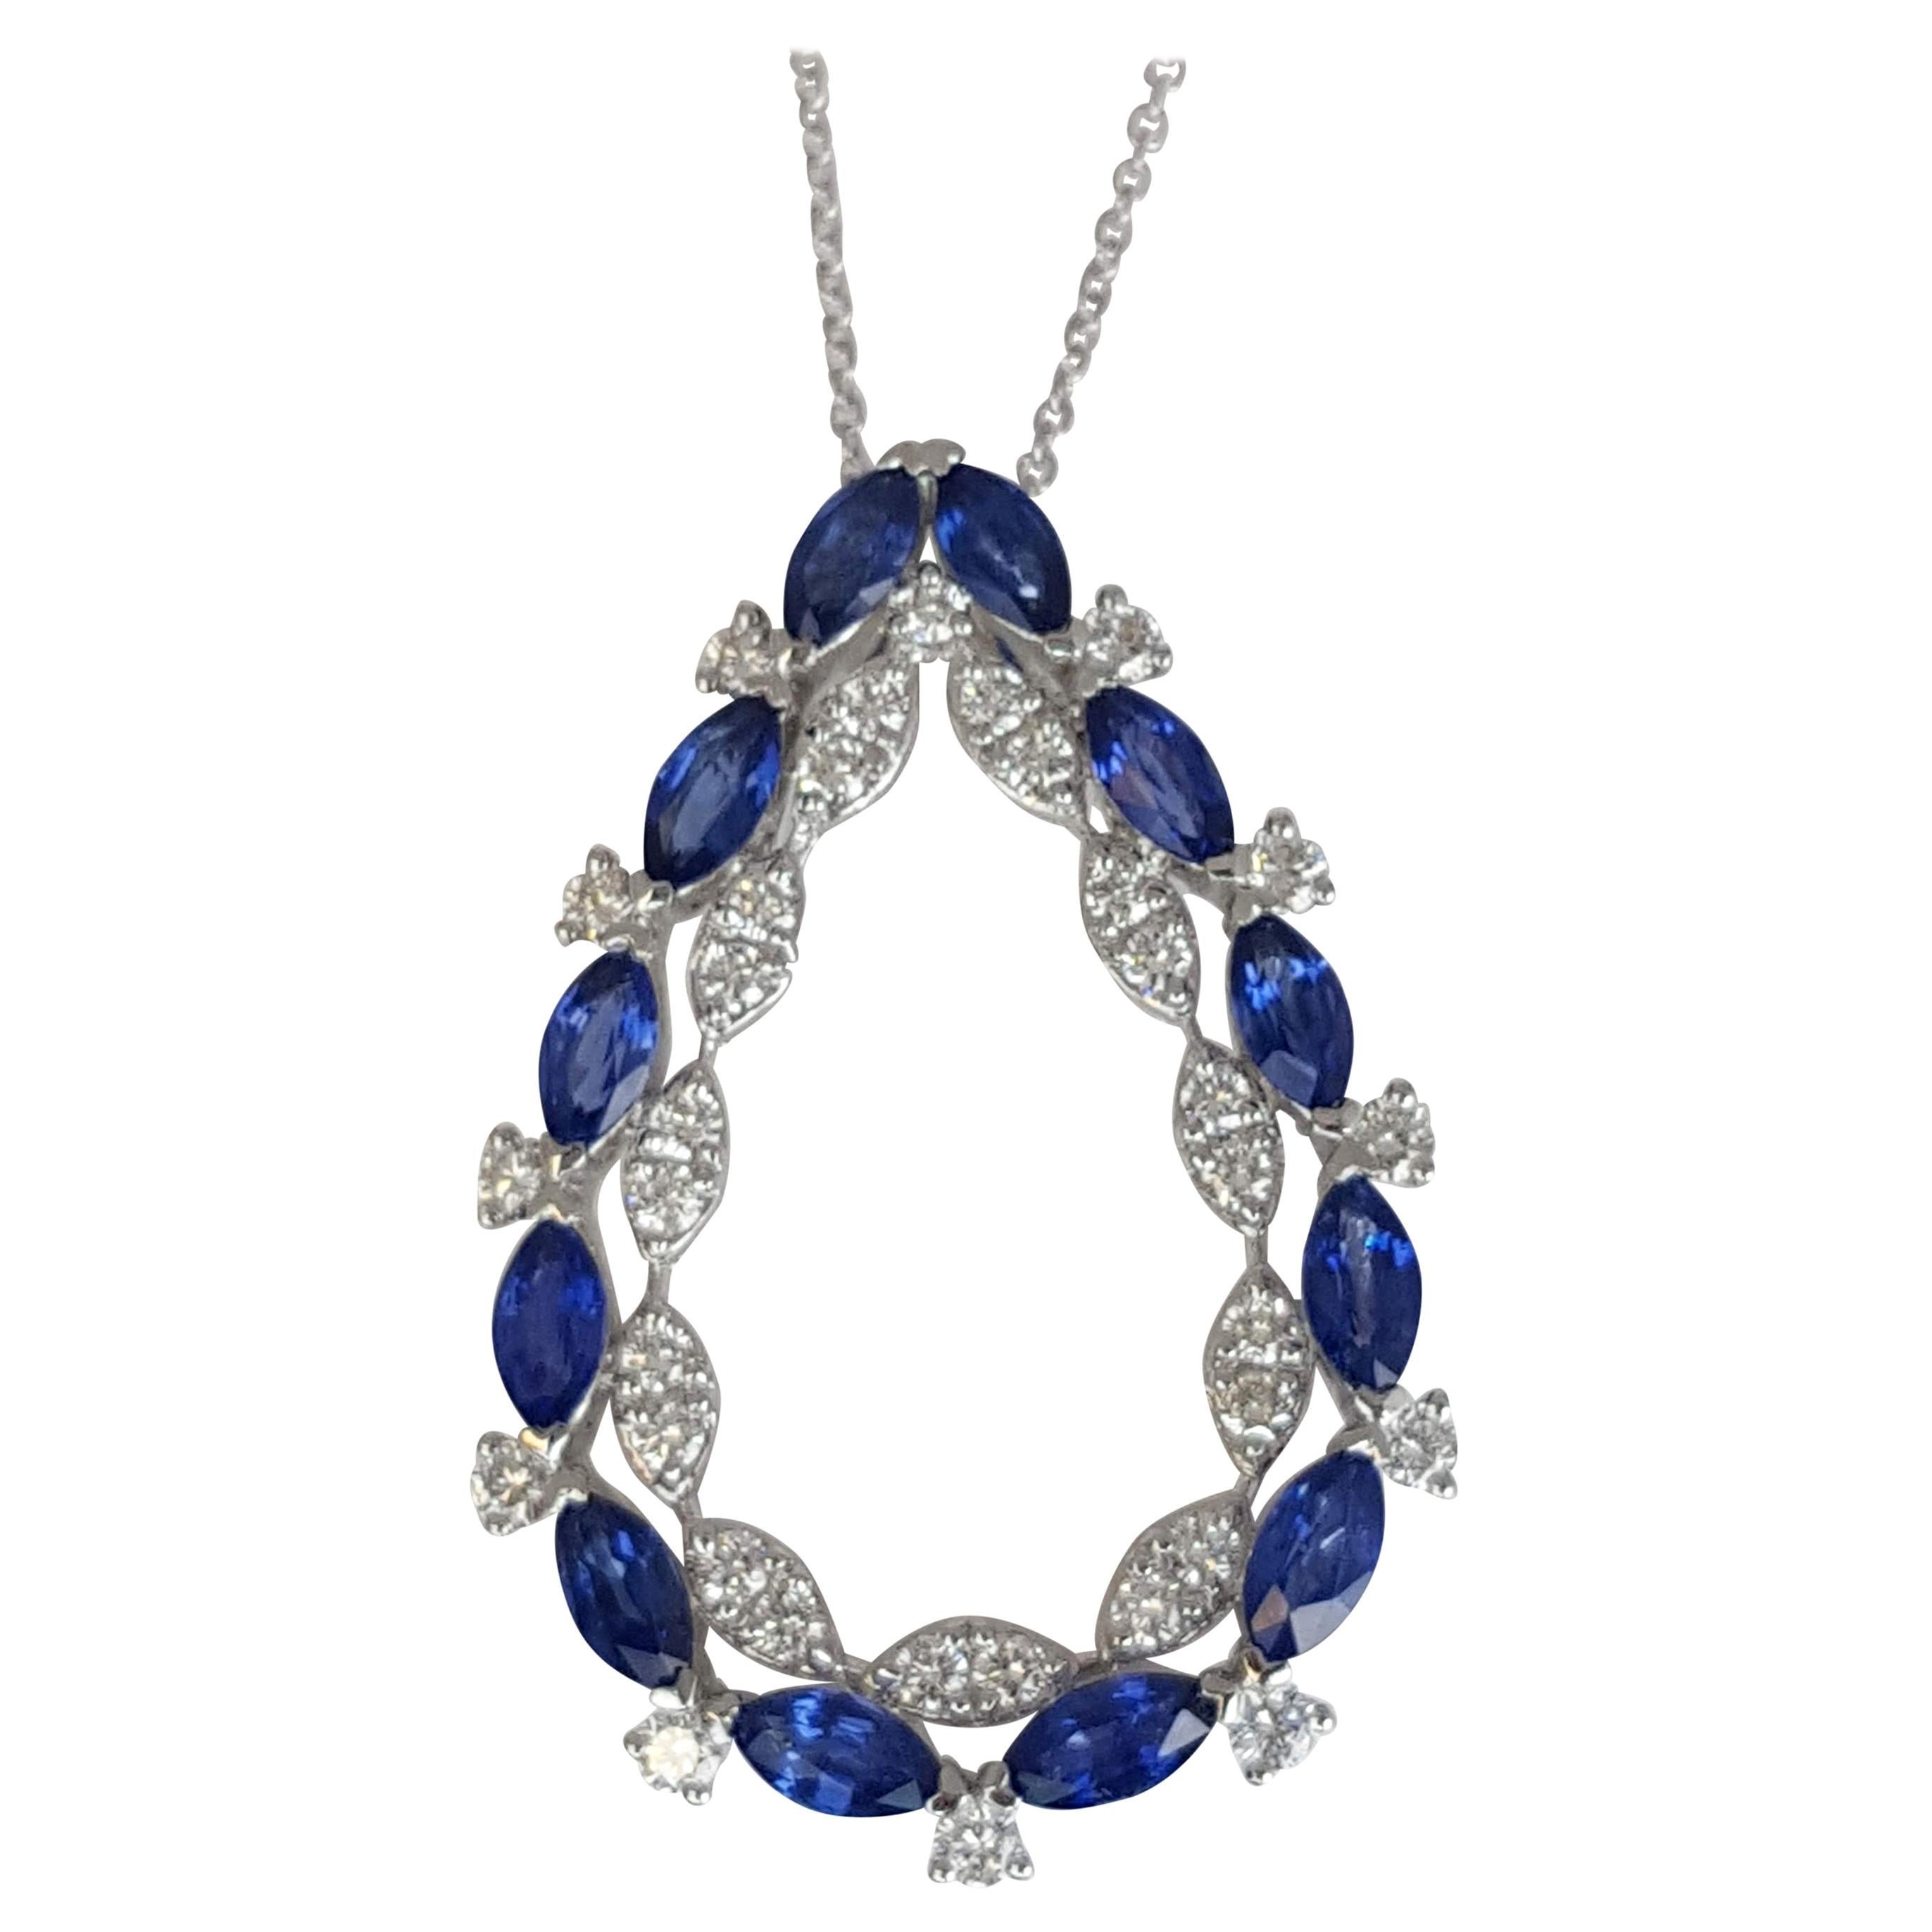 At the outside of this pendant, 12 marquise-cut blue sapphires playfully alternate with 11 round diamonds, creating a captivating dance of color and sparkle. The sapphires symbolize wisdom and royalty, while the diamonds represent purity and